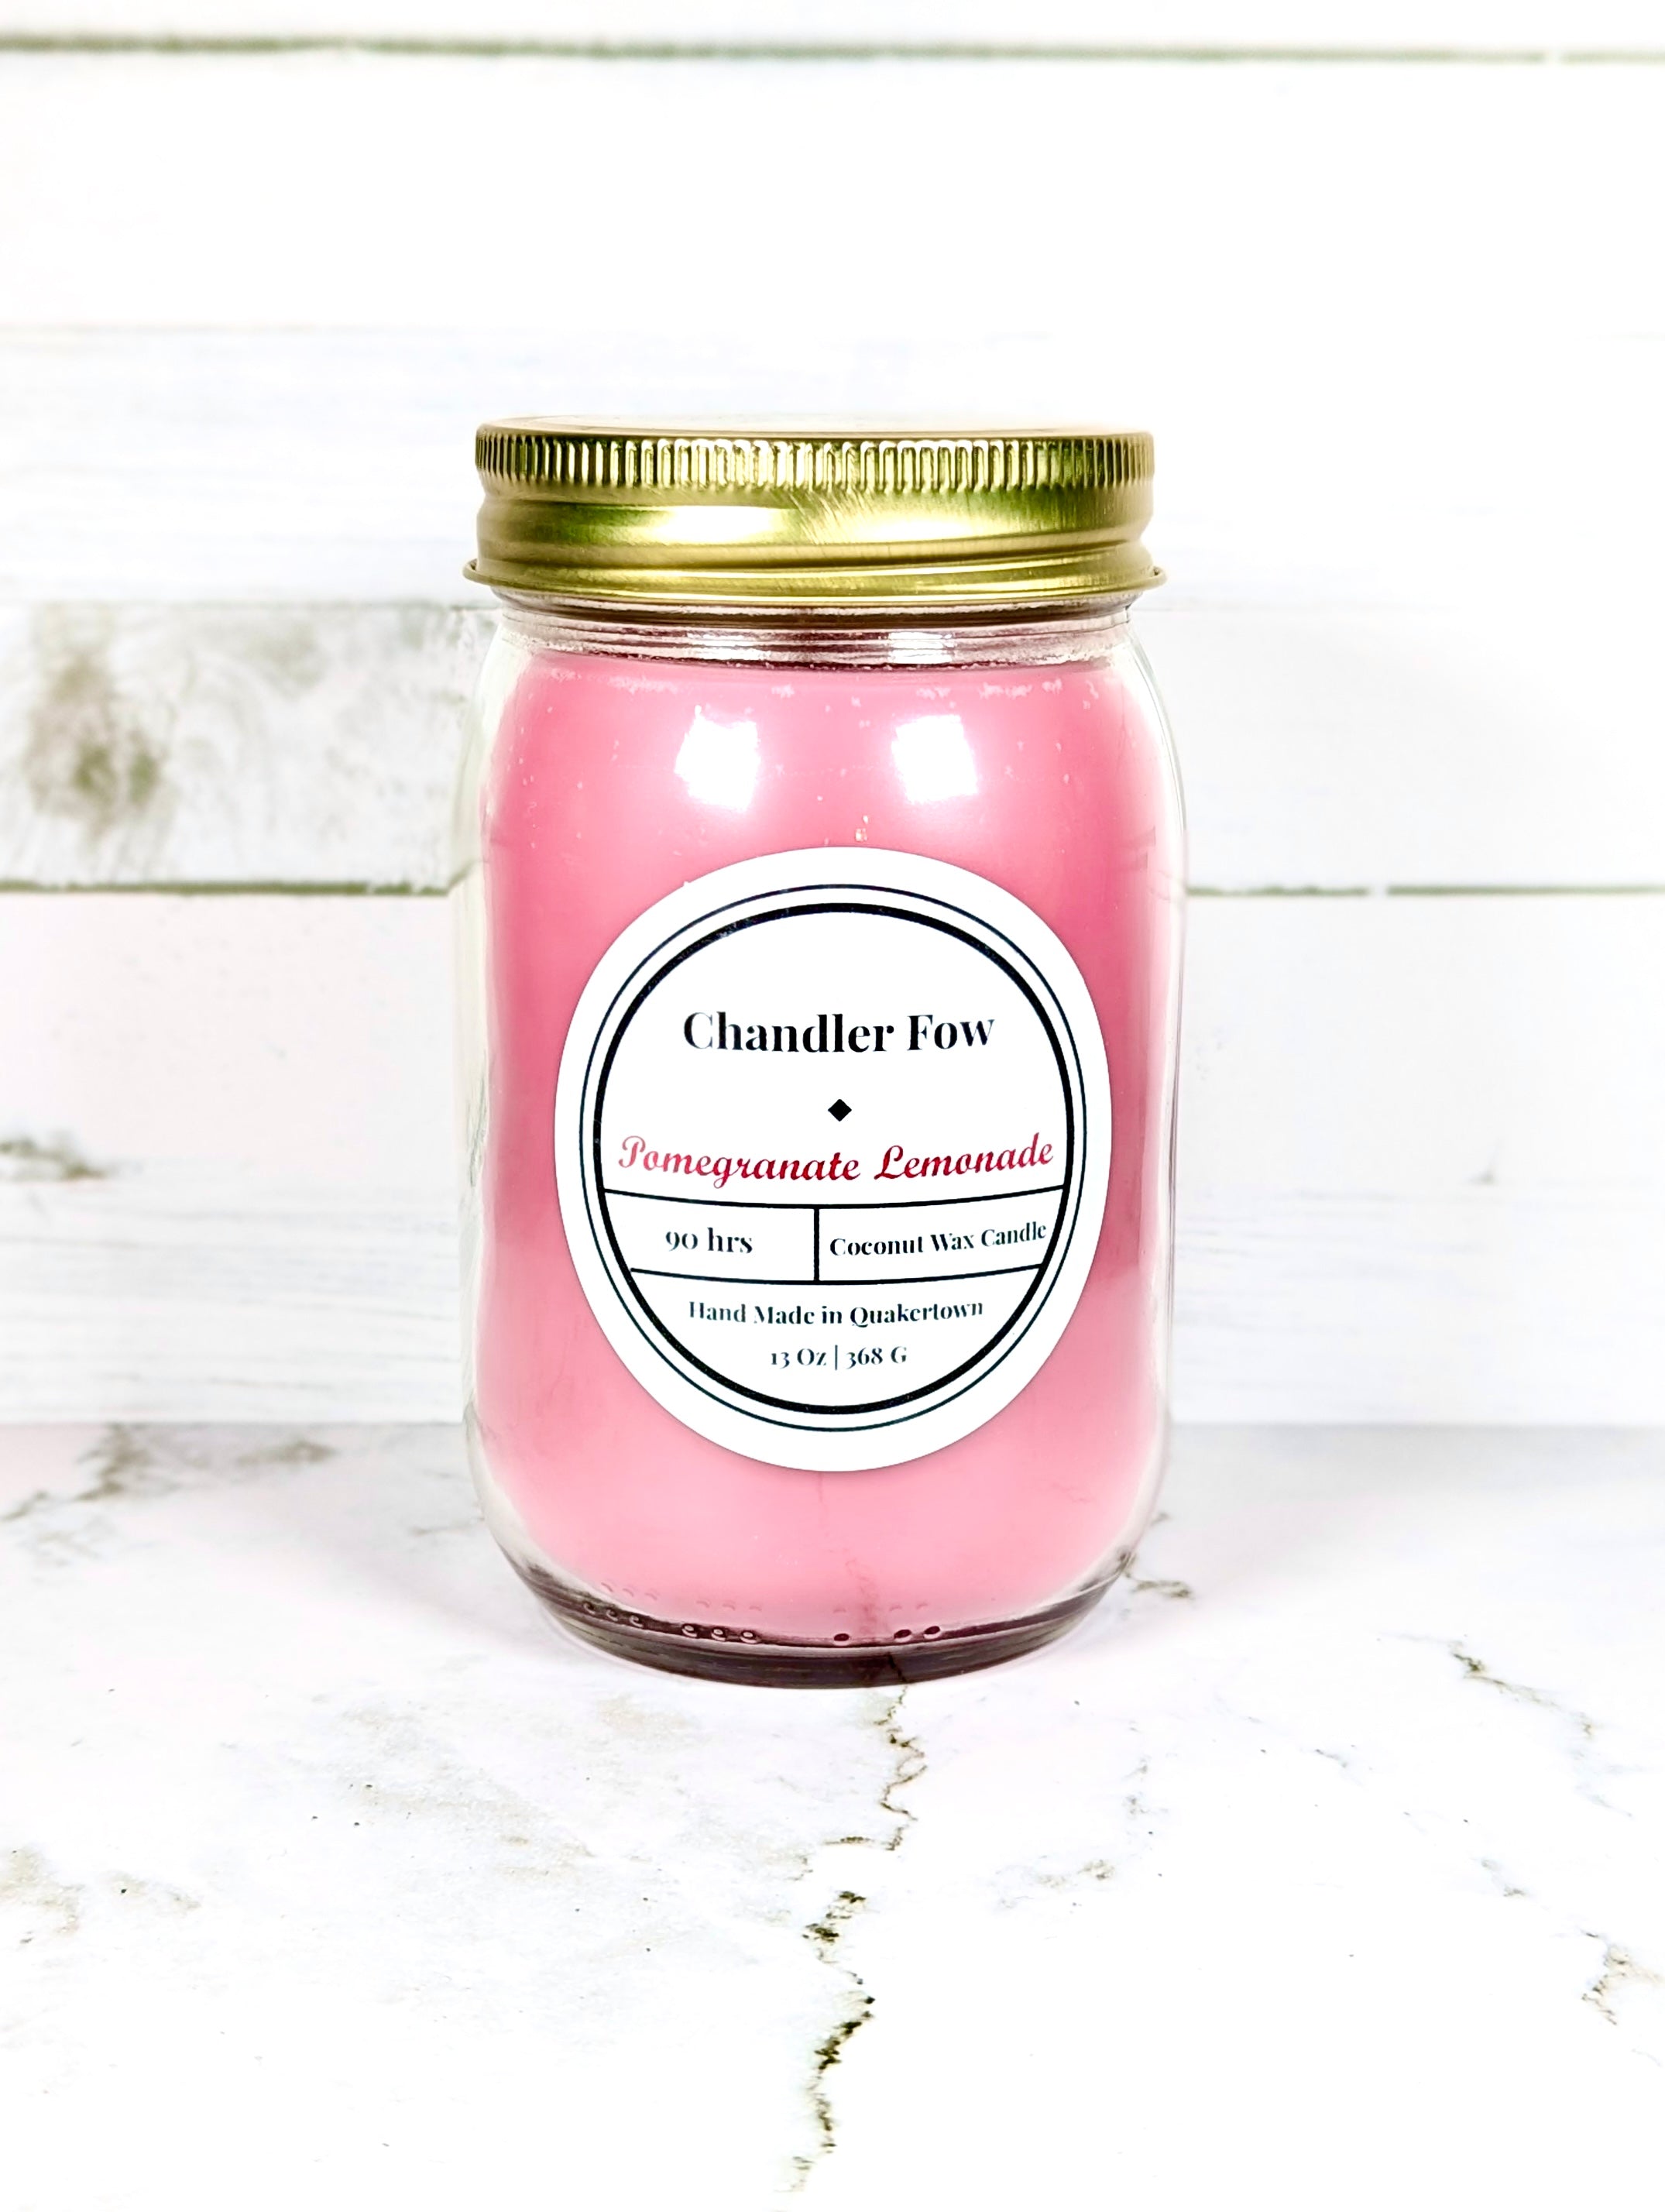 Chandler Fow Candles